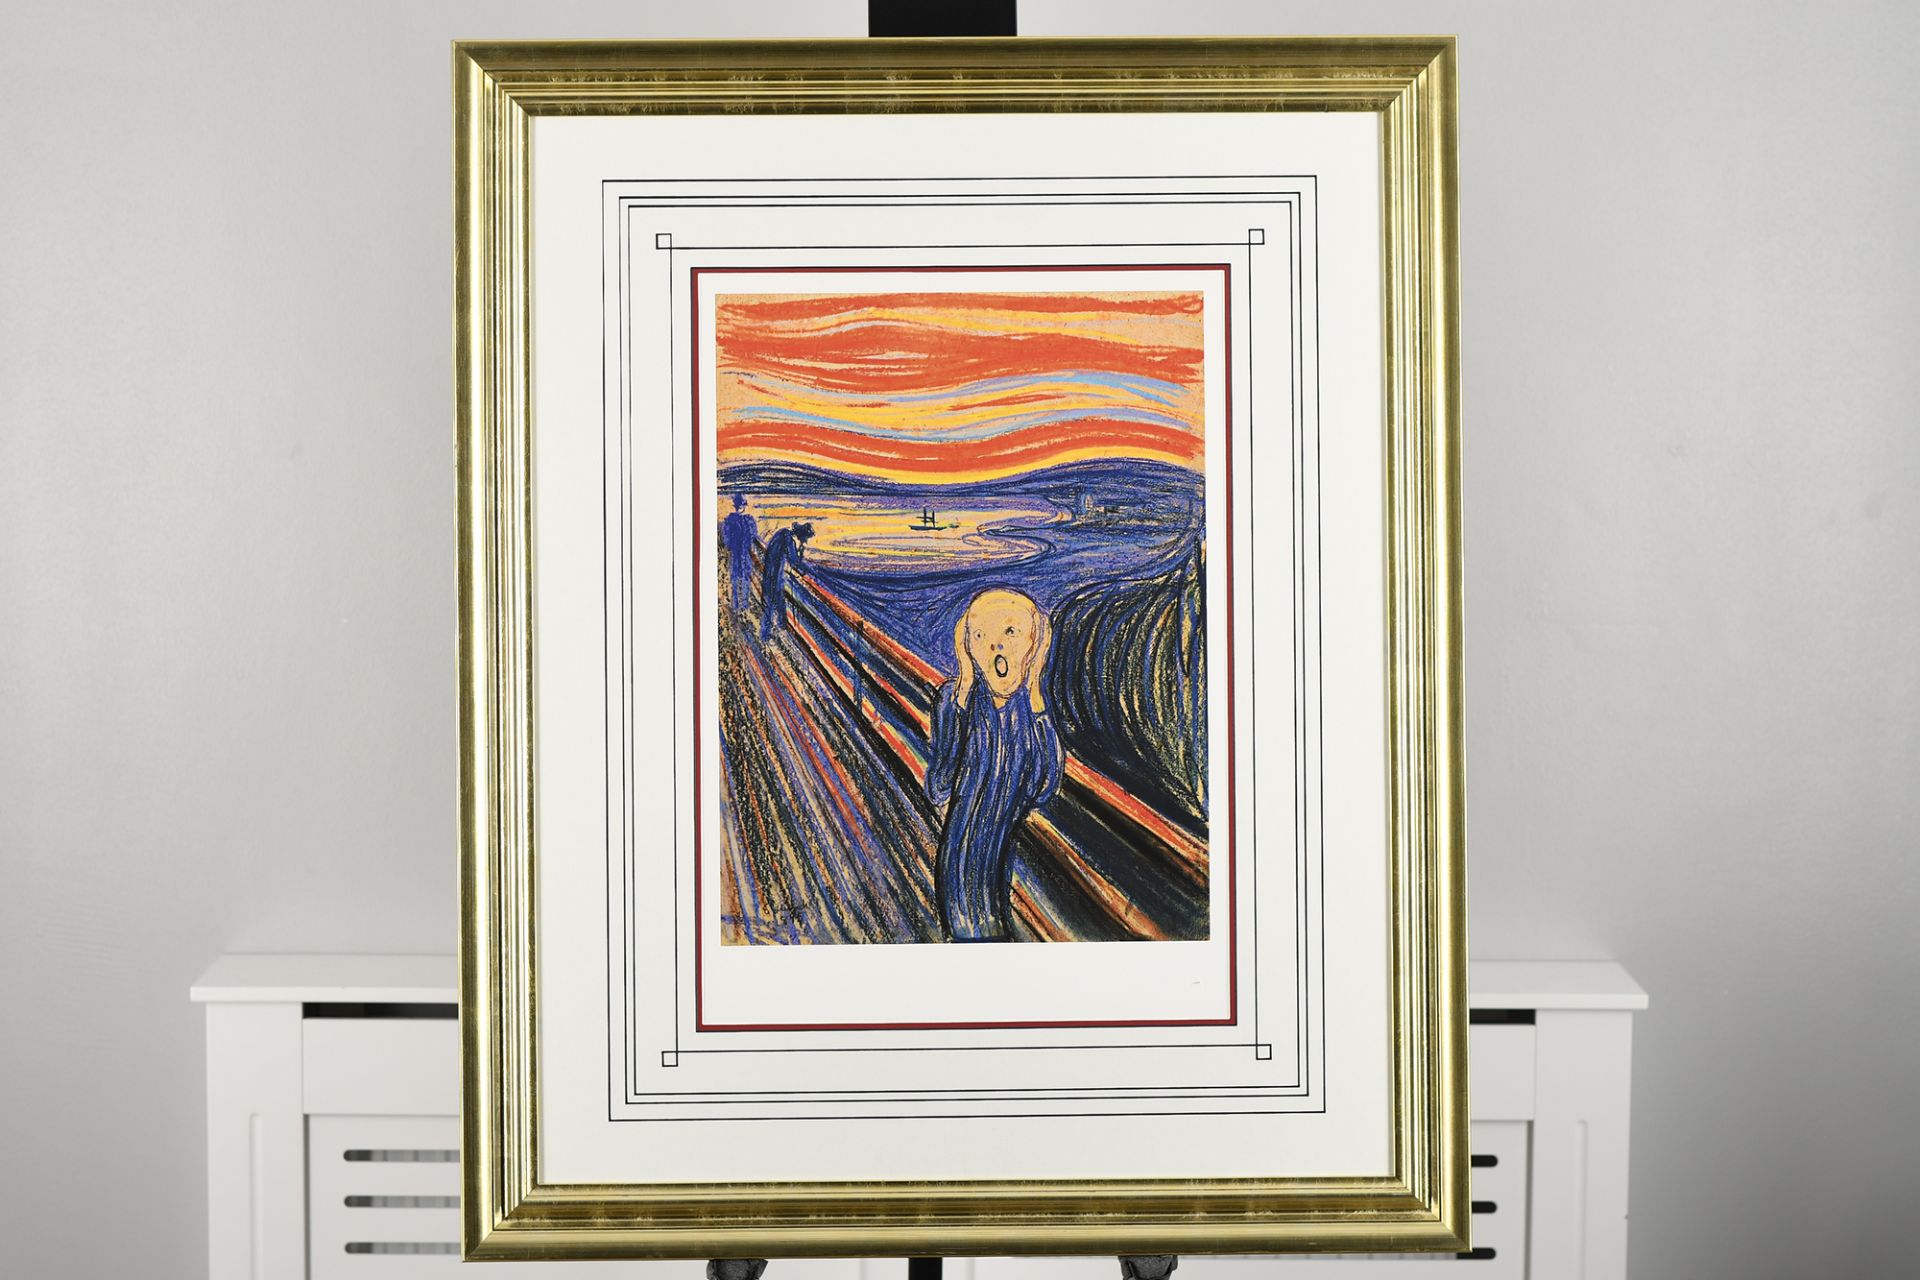 Edvard Munch Limited Edition "The Scream" - Image 5 of 10